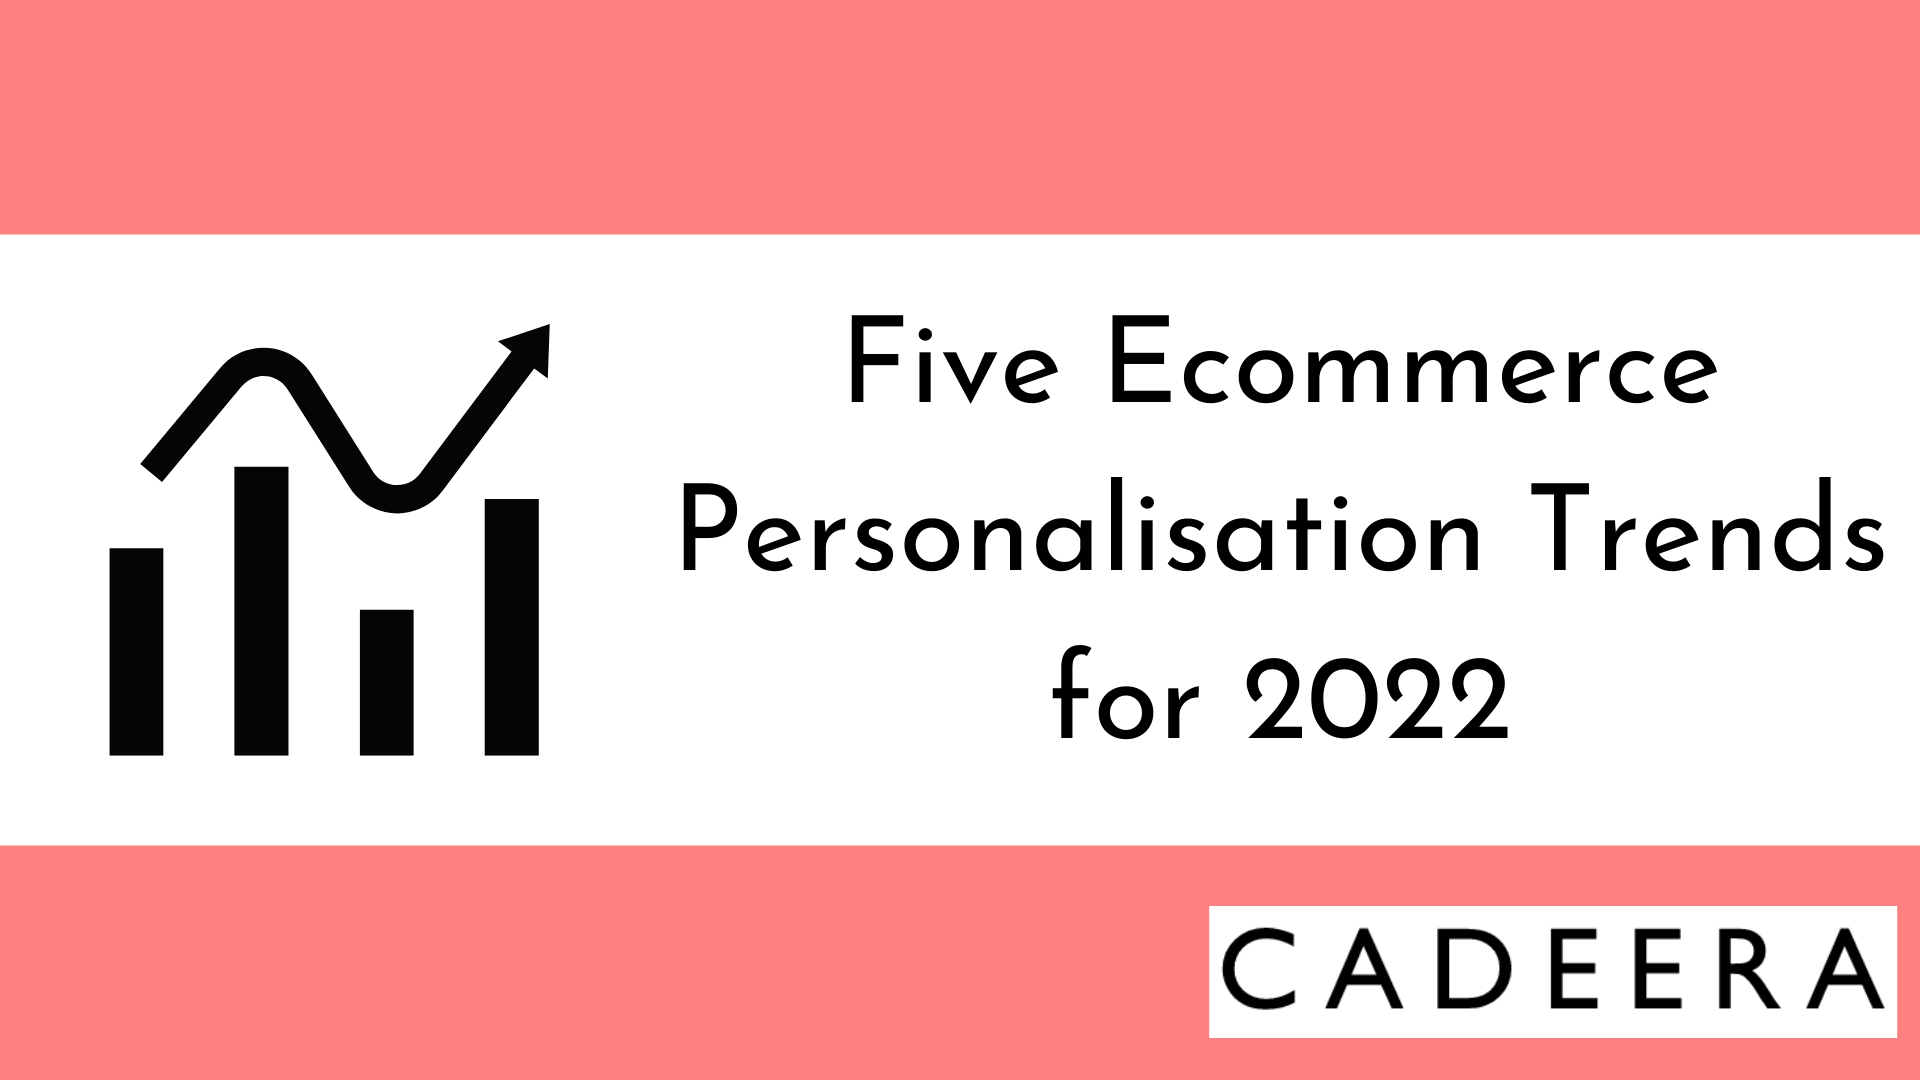 Five Ecommerce Personalisation Trends for 2022